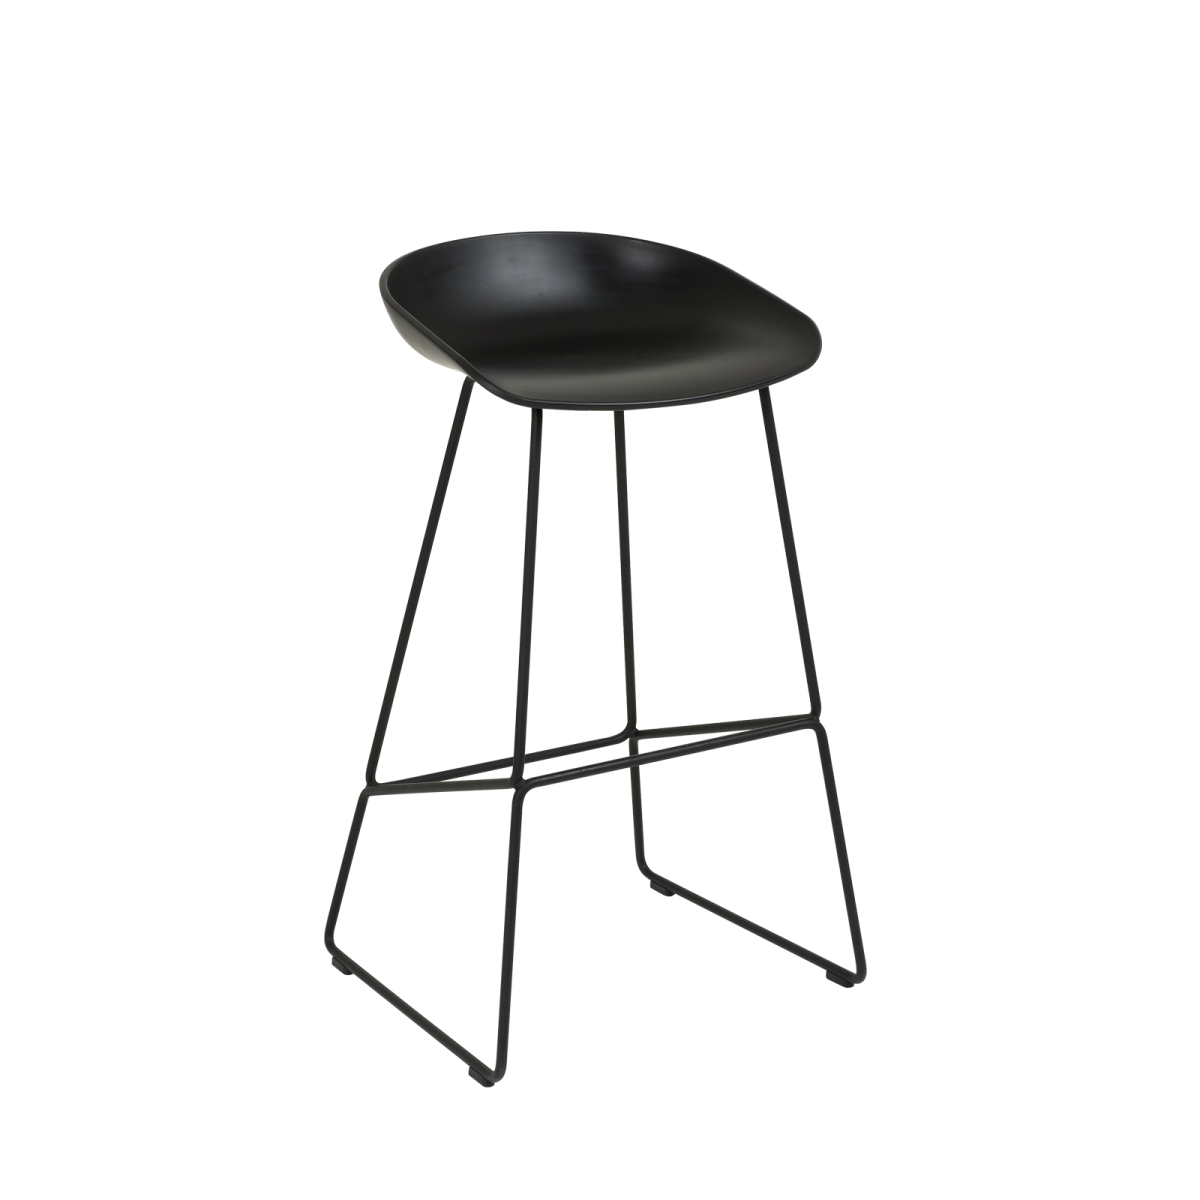 Equator Stool Black with Black Skid Legs Hire for Events